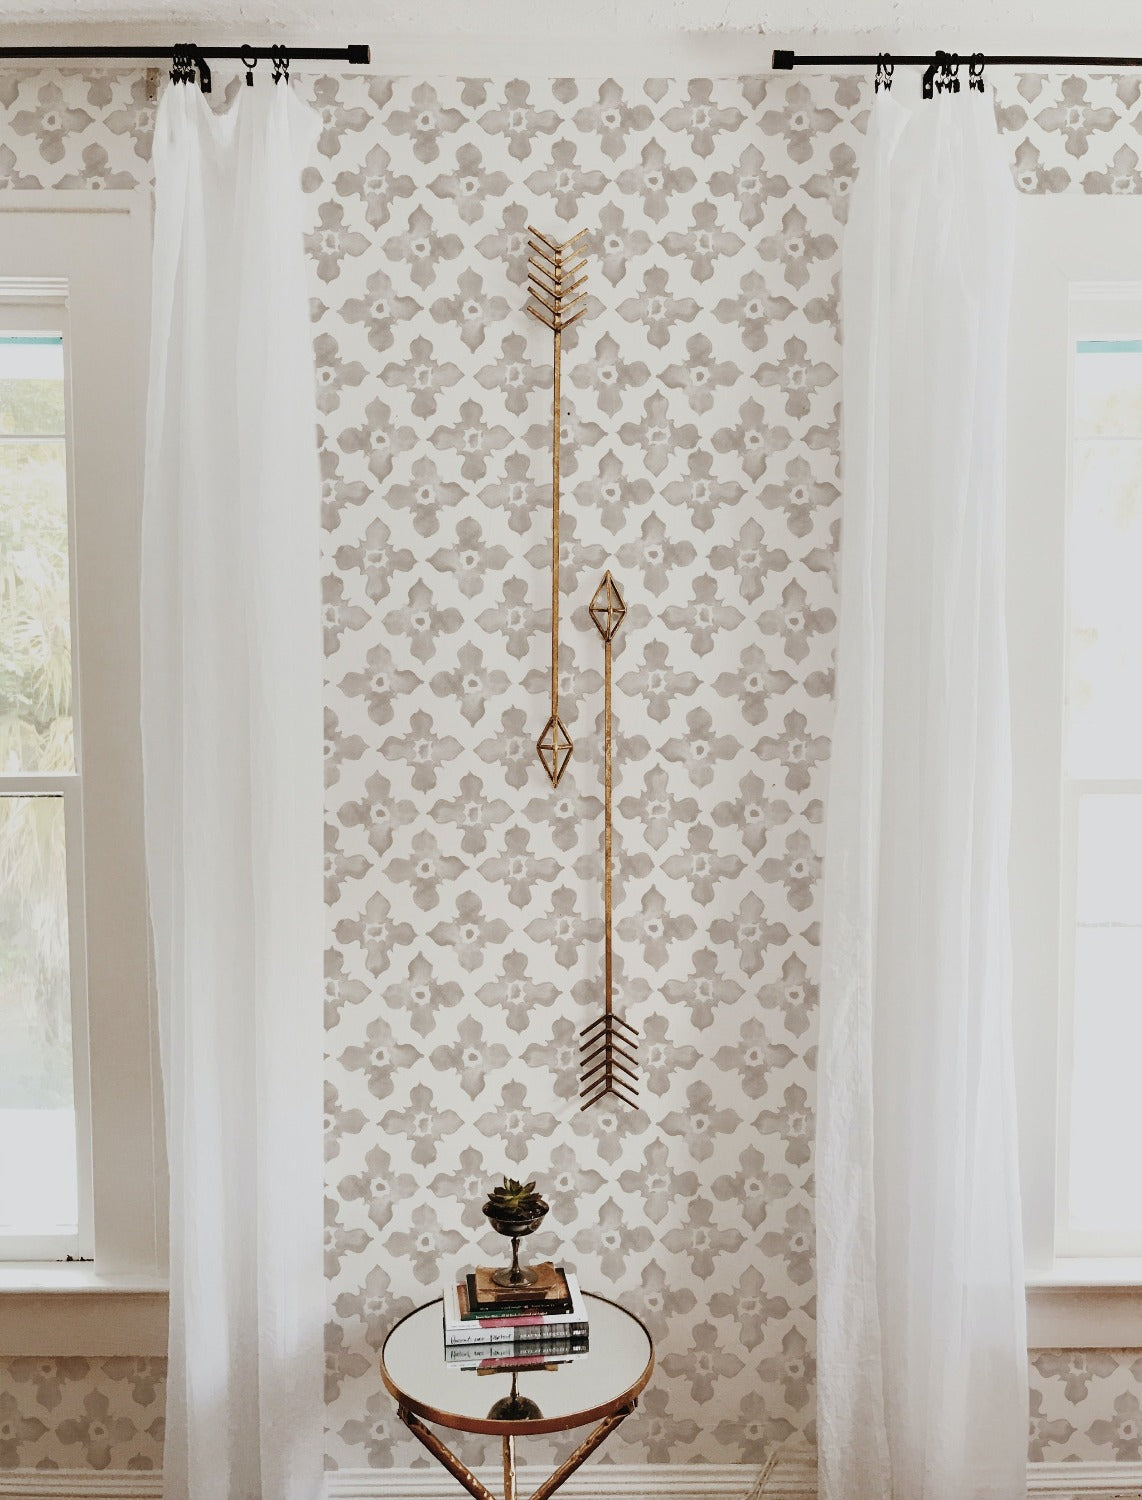 An inviting corner of a room displays the "Moroccan Tile - Beige" wallpaper, which serves as a warm and stylish backdrop for a round side table and a decorative golden arrow wall piece. The gentle beige hues of the wallpaper pattern provide a neutral yet decorative background, illustrating how it can seamlessly integrate into a home's decor.